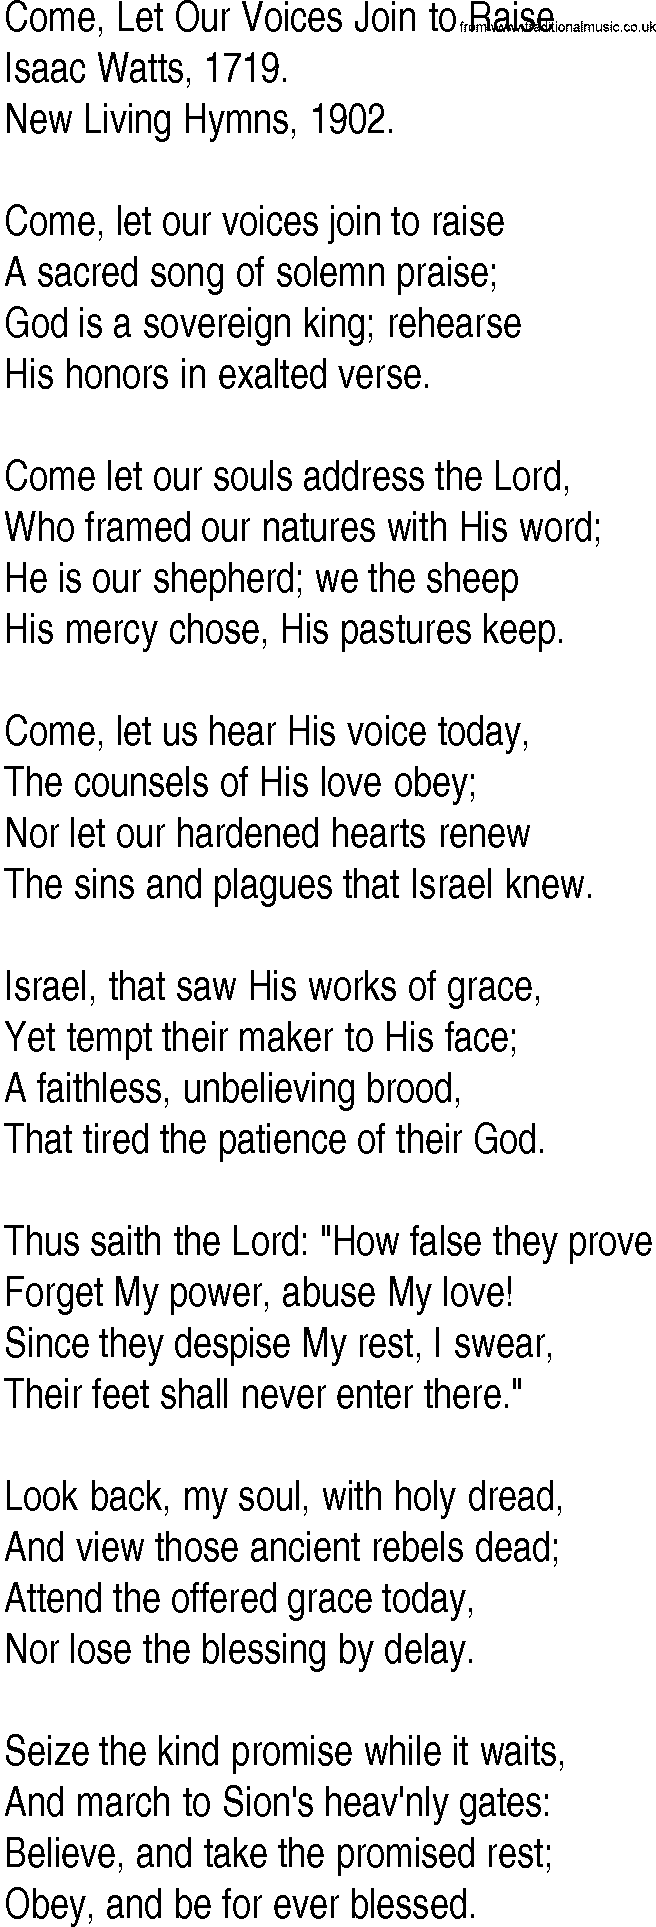 Hymn and Gospel Song: Come, Let Our Voices Join to Raise by Isaac Watts lyrics